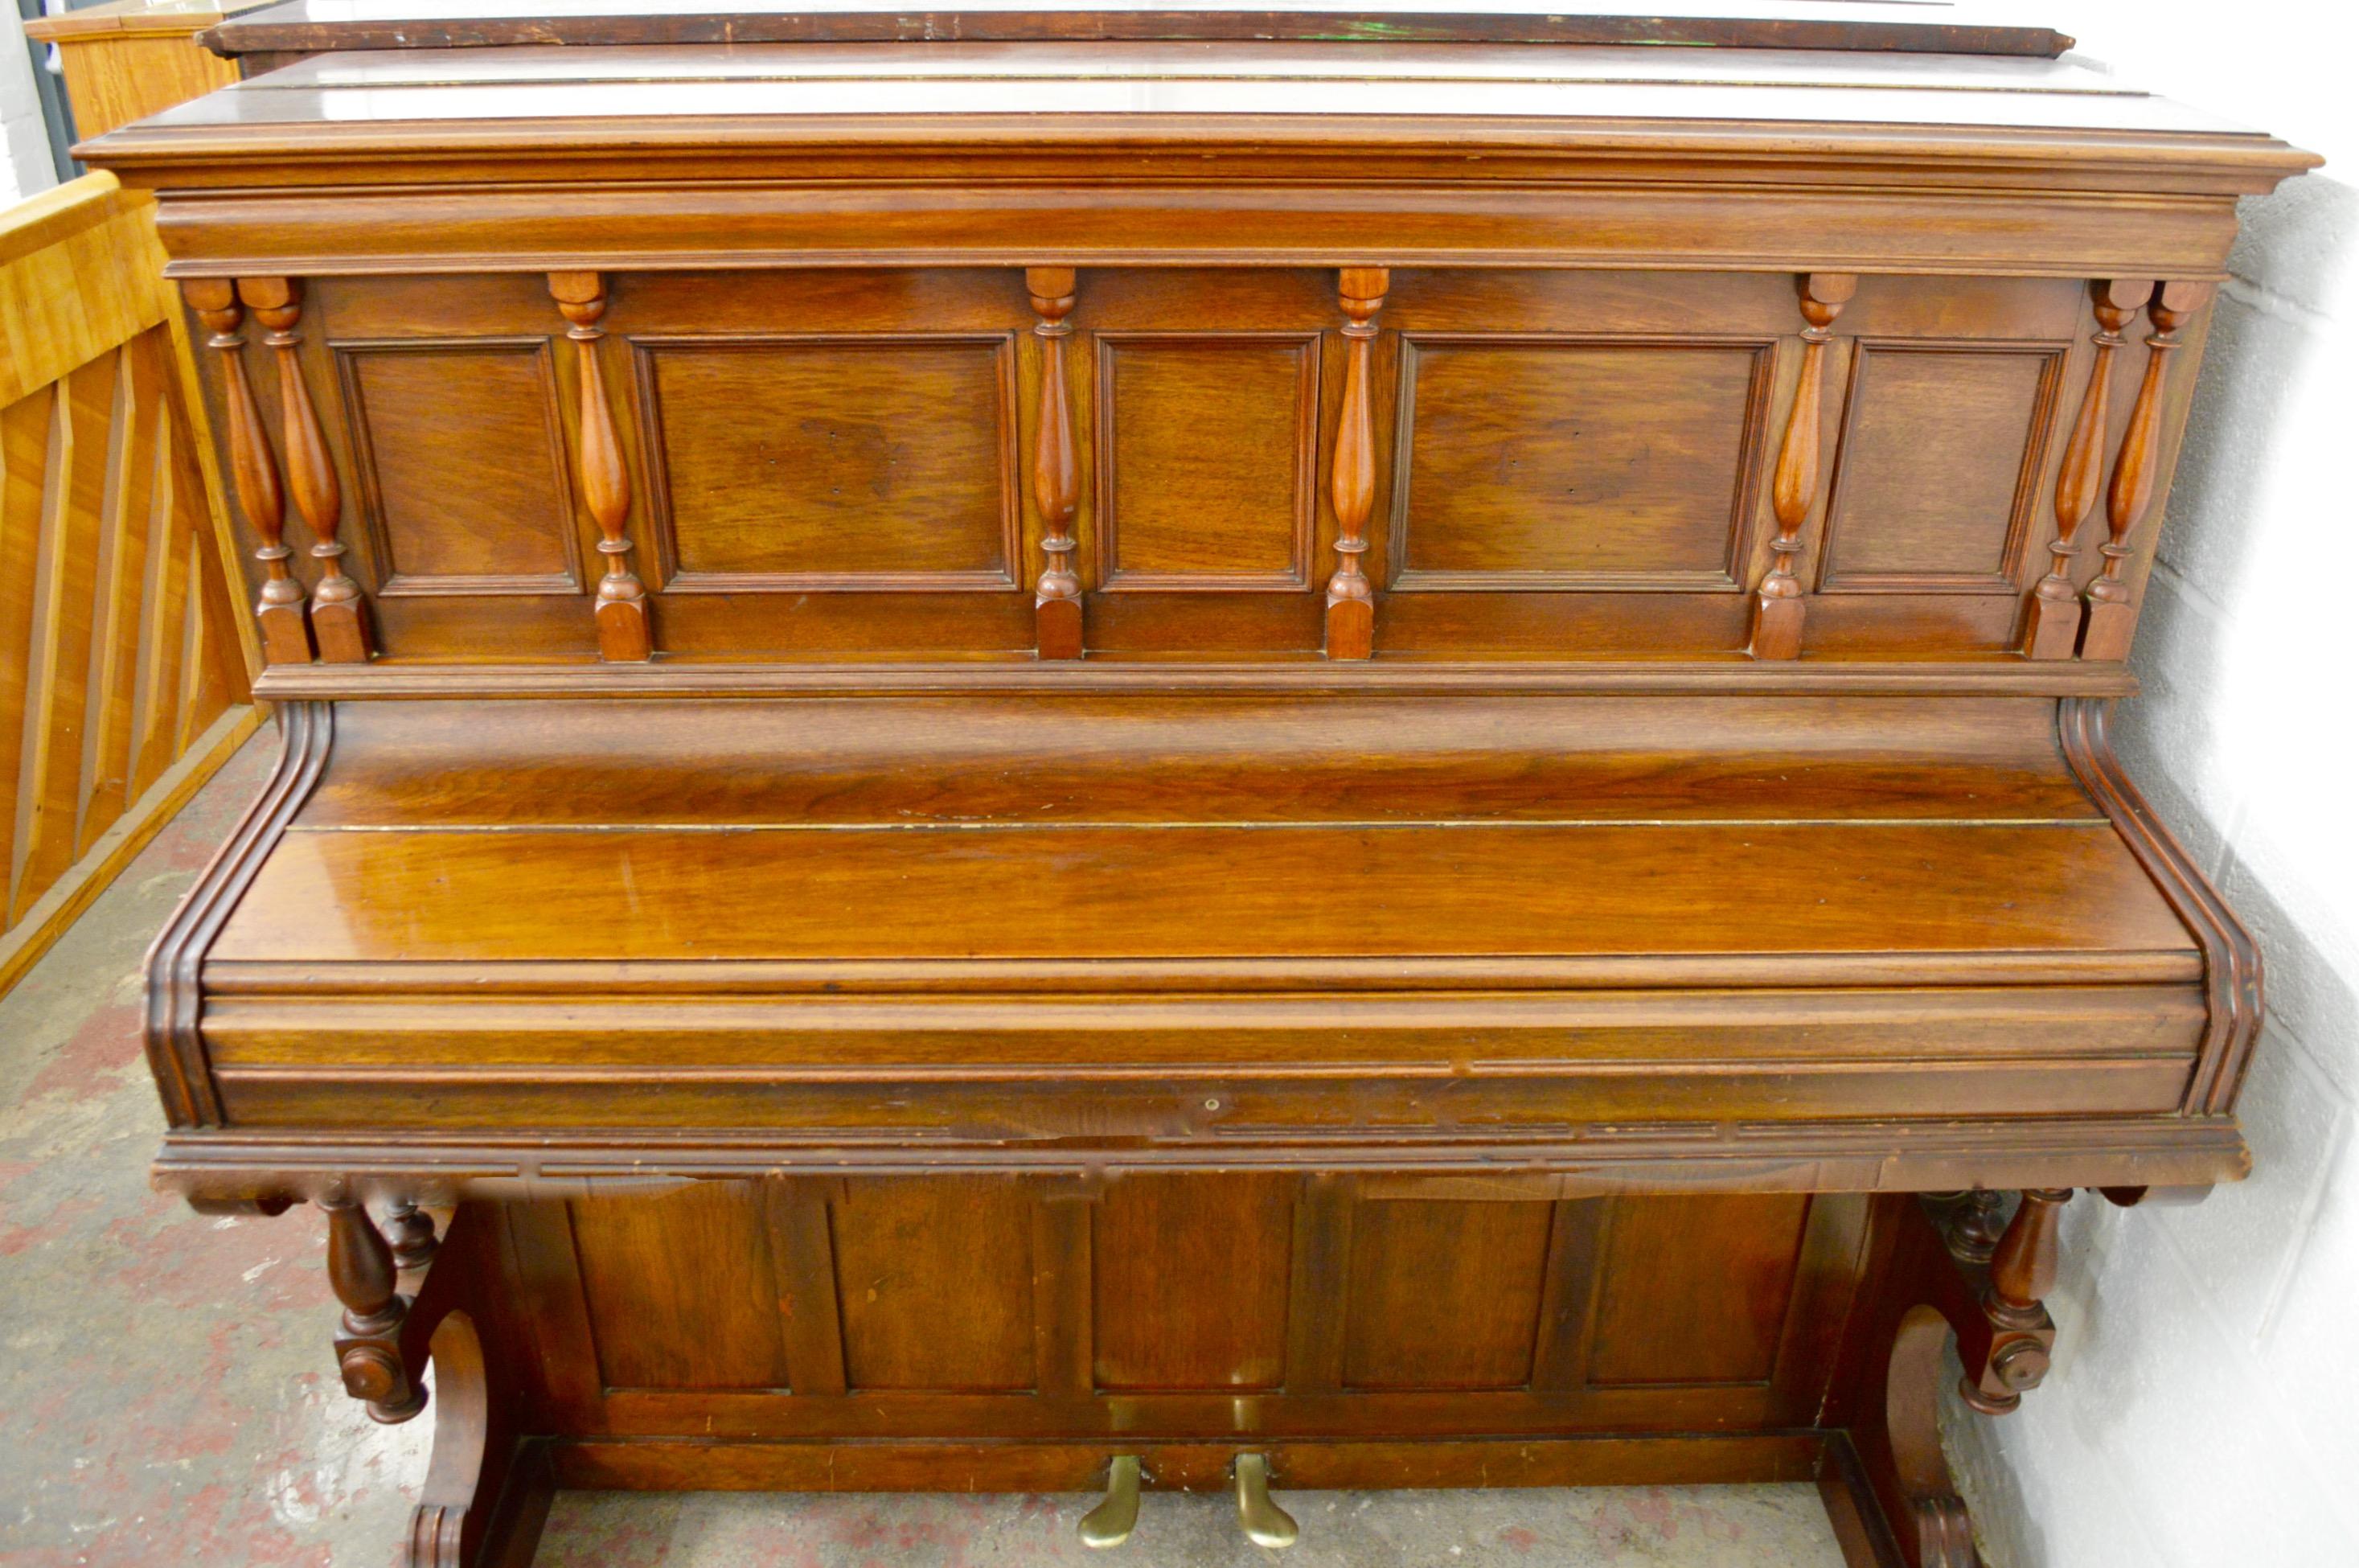 John Brinsmead of London were a very good piano maker, the pianos they made are always of the highest of quality and were made to be robust and musical, reflecting their main design which was for melodic longevity, musicality, and with cabinets that